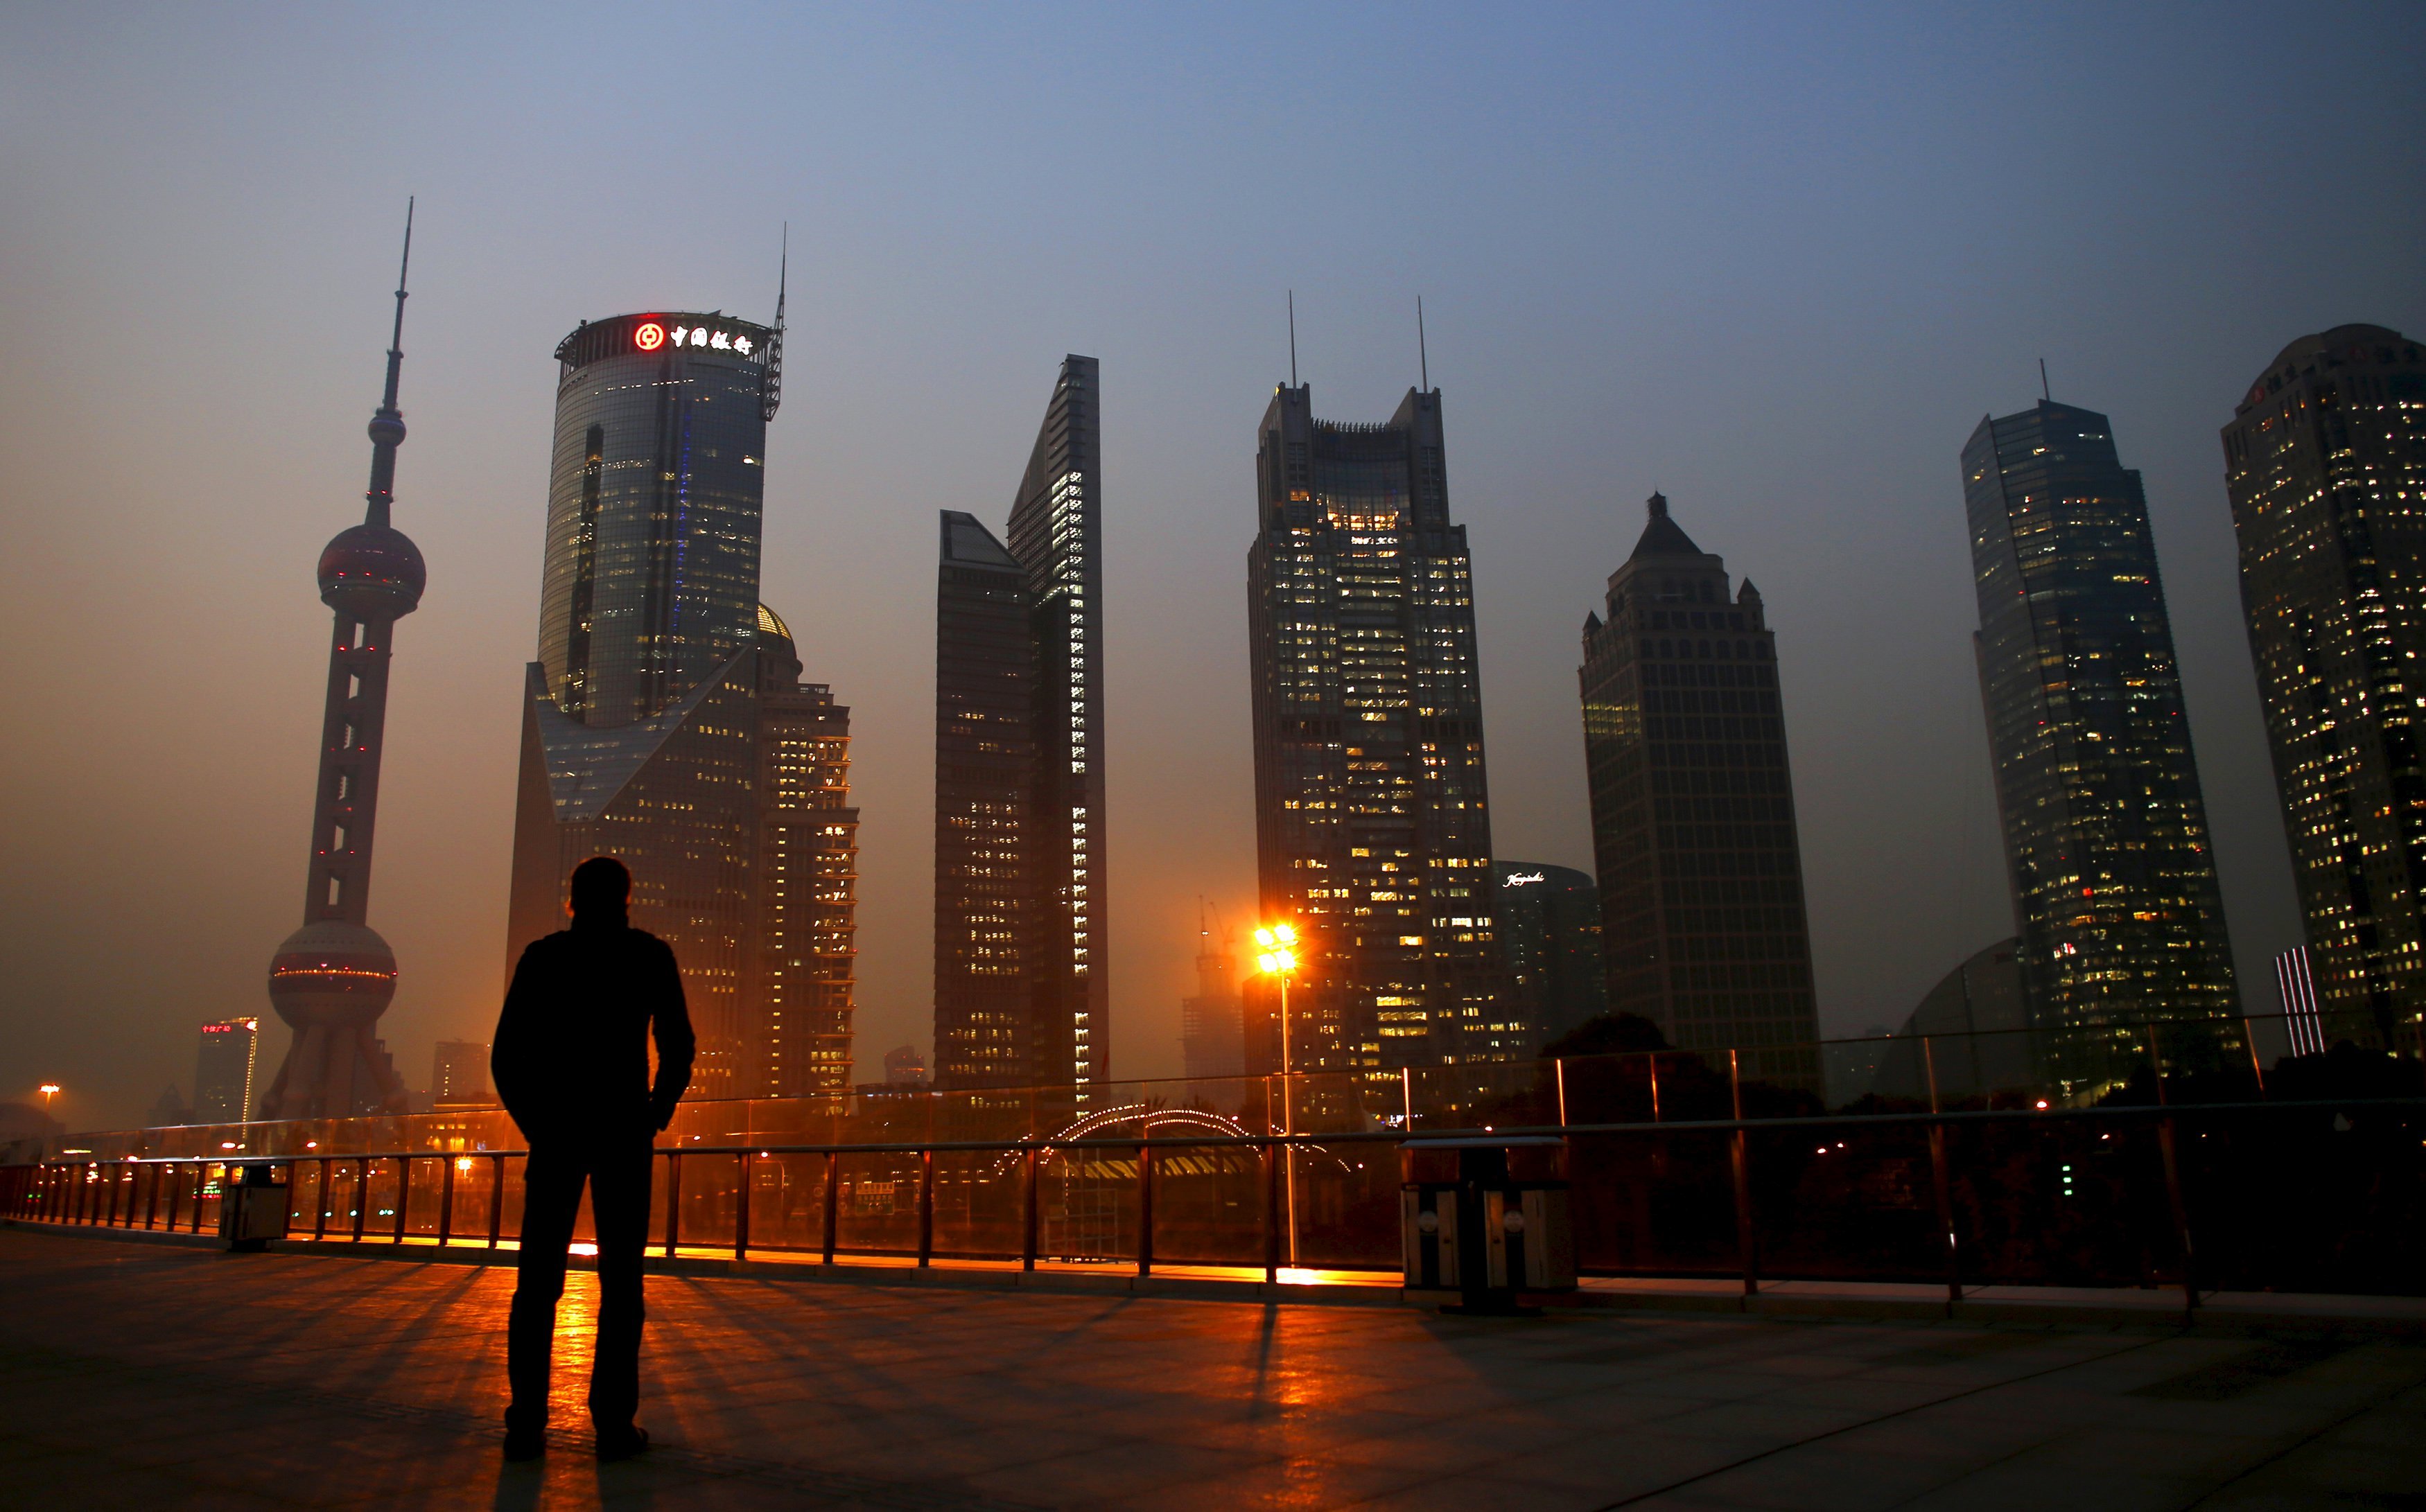 A man looks at the Pudong financial district of Shanghai in this November 20, 2013 file photo. As China's economy registers its slowest growth in a quarter century, more borrowers are in default, swamping banks in a rising tide of non-performing loans (NPLs). REUTERS/Carlos Barria/Files